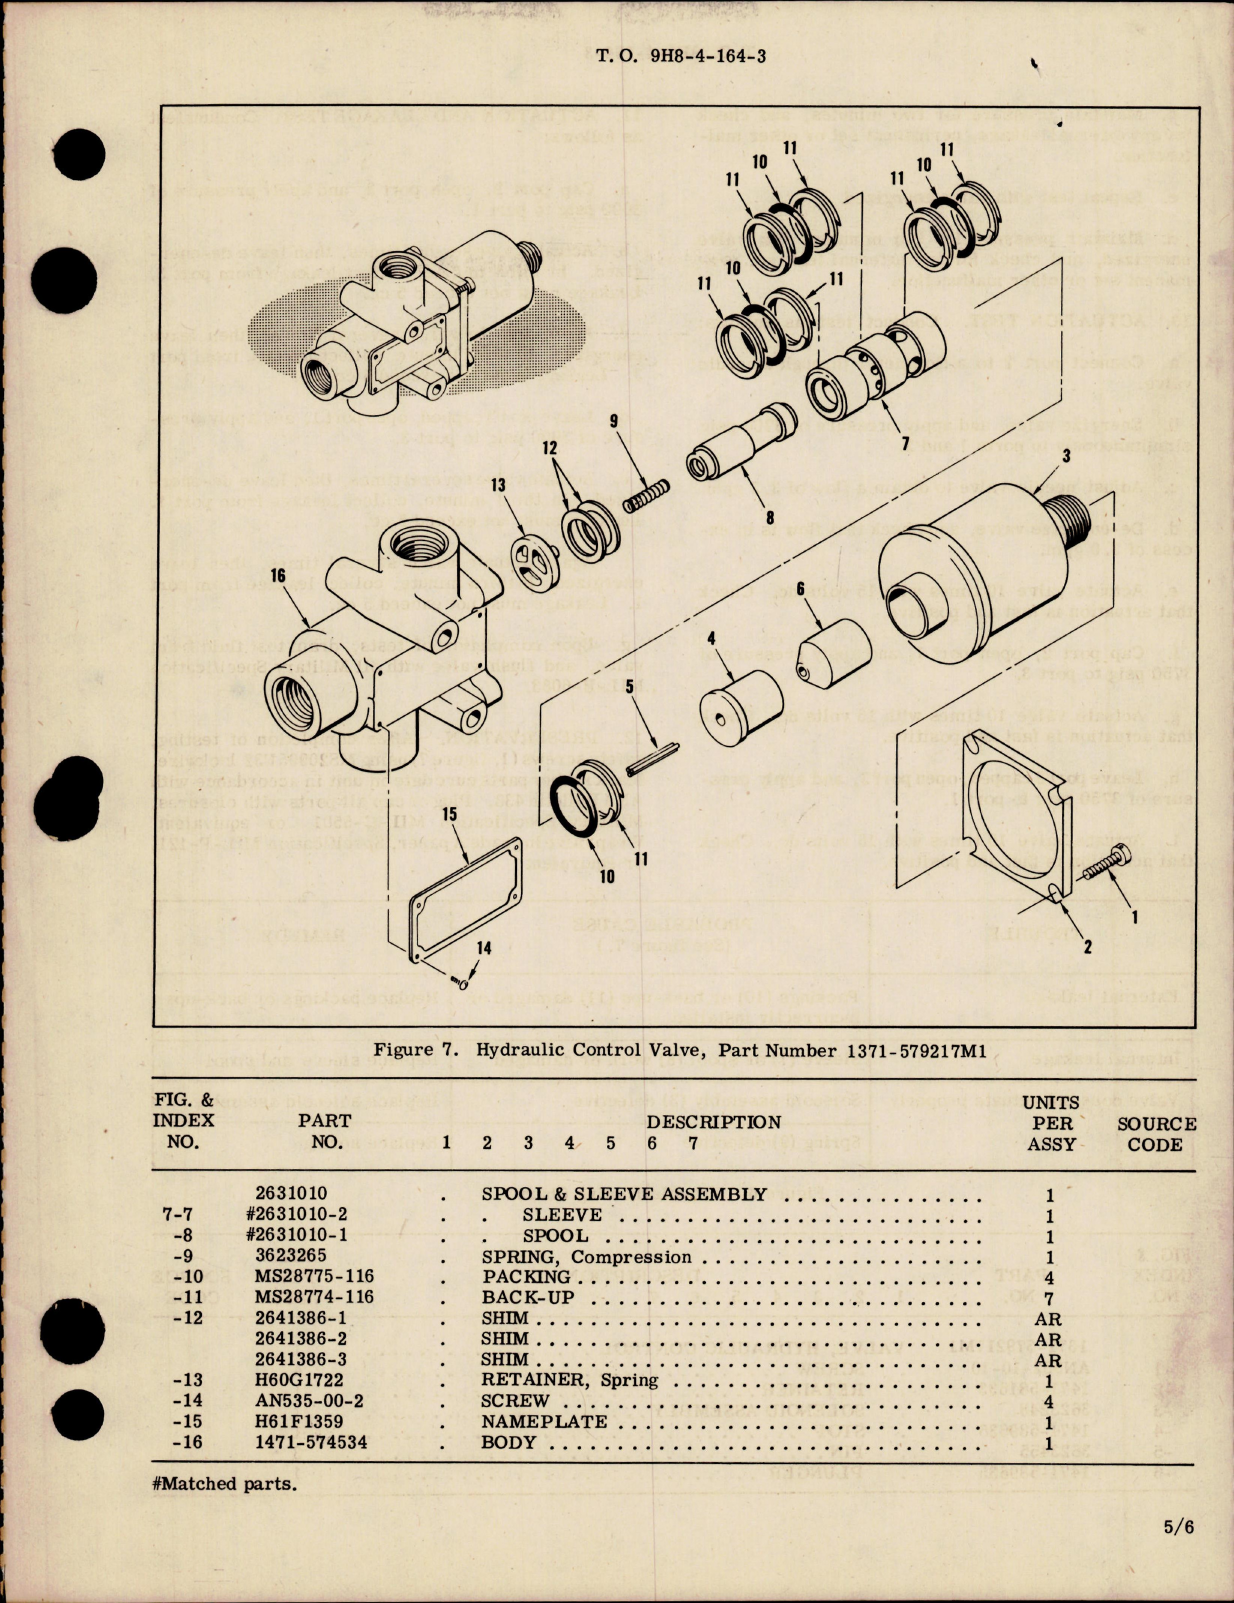 Sample page 5 from AirCorps Library document: Overhaul with Parts Breakdown for Hydraulic Control Valve - Part 1371-579217M1 